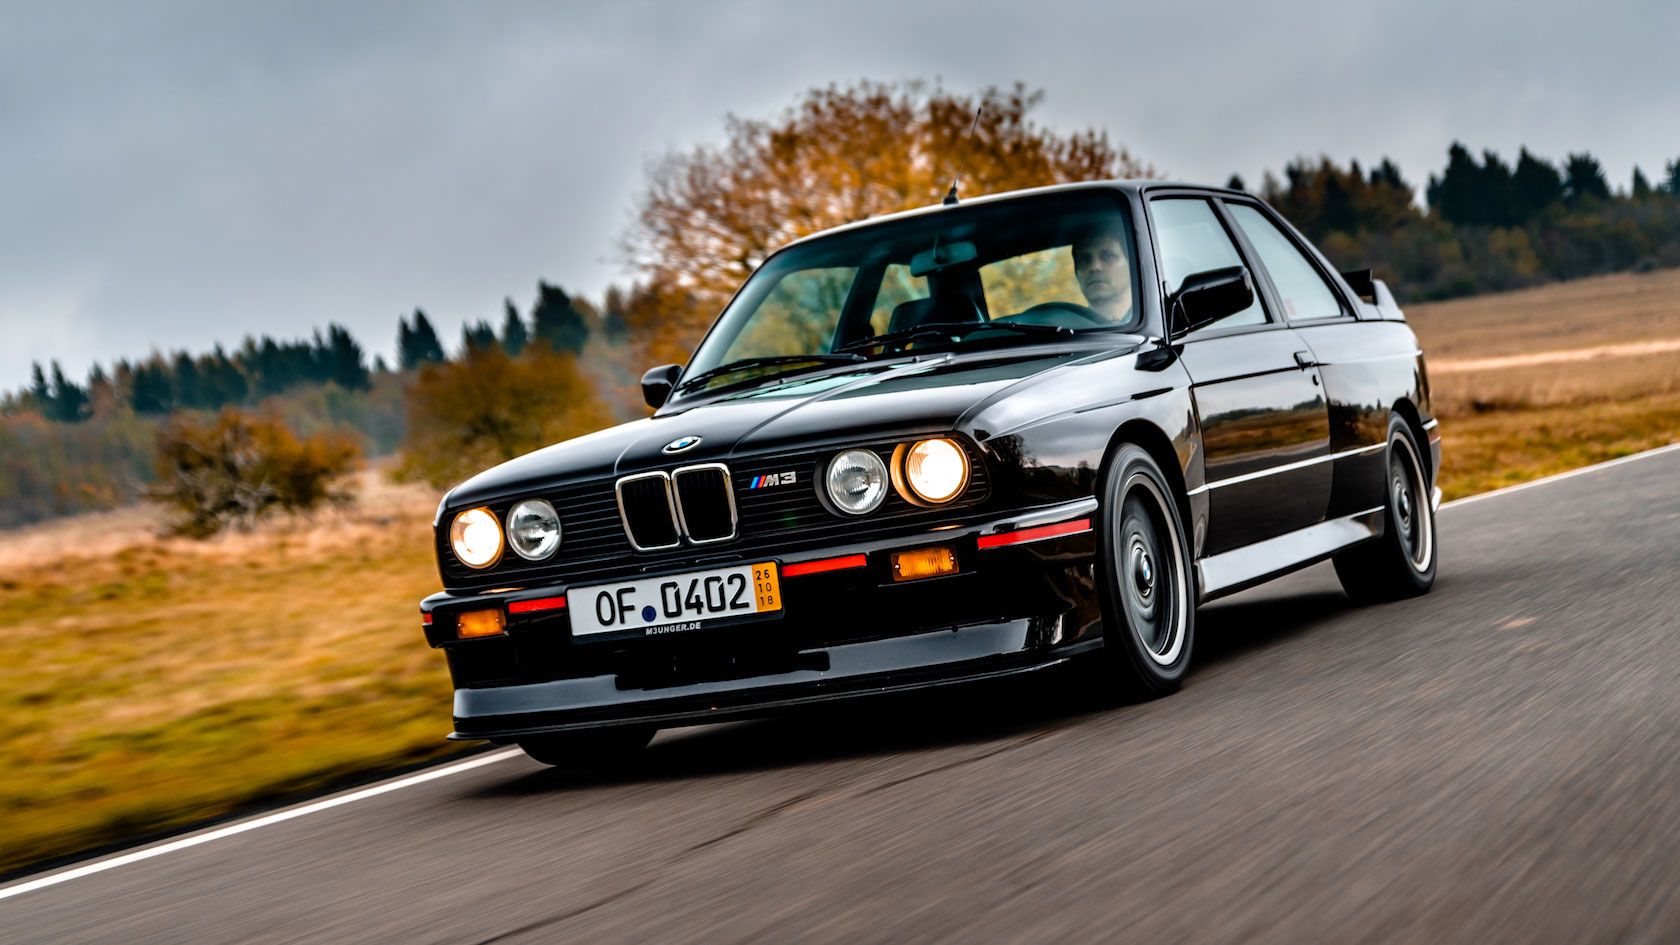 1990 BMW M3 Sport Evolution (E30) driving on the highway